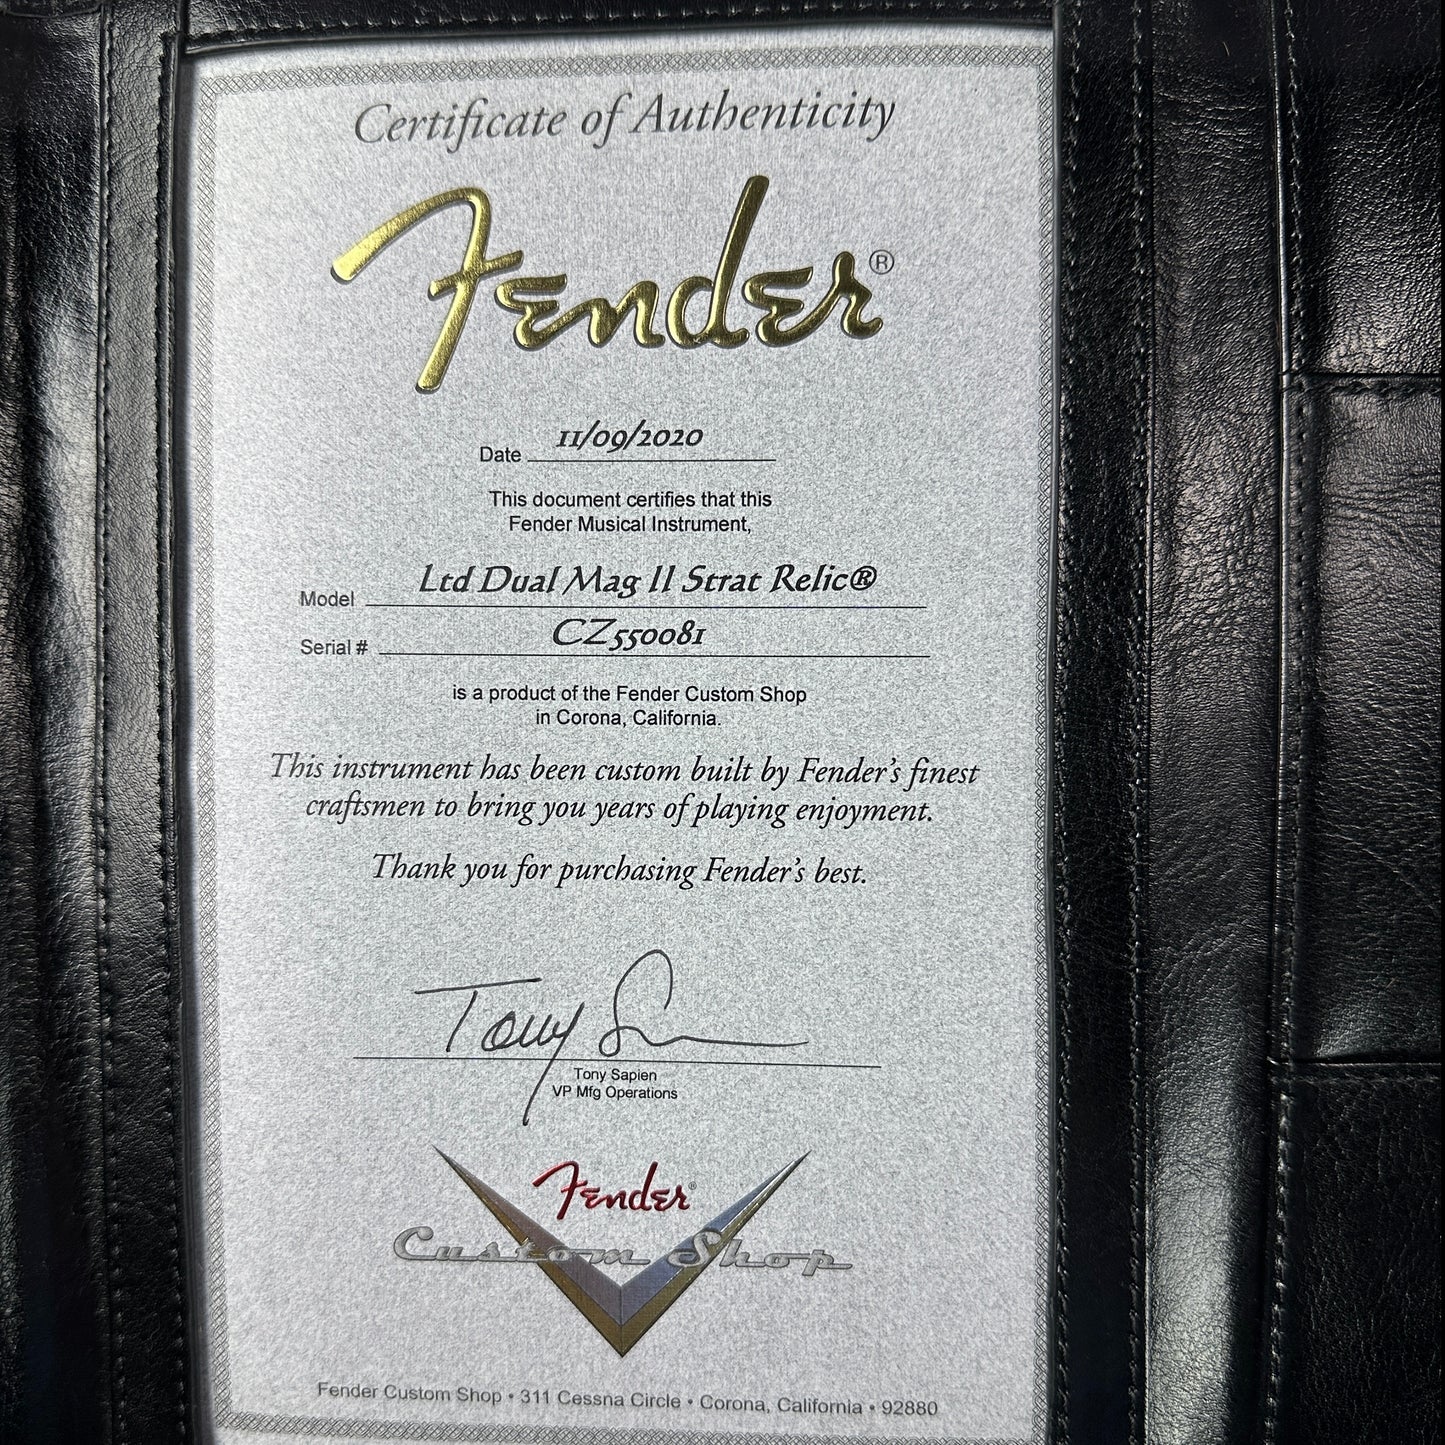 Certificate of authenticity for Used Fender Dual Mag Stratocaster.